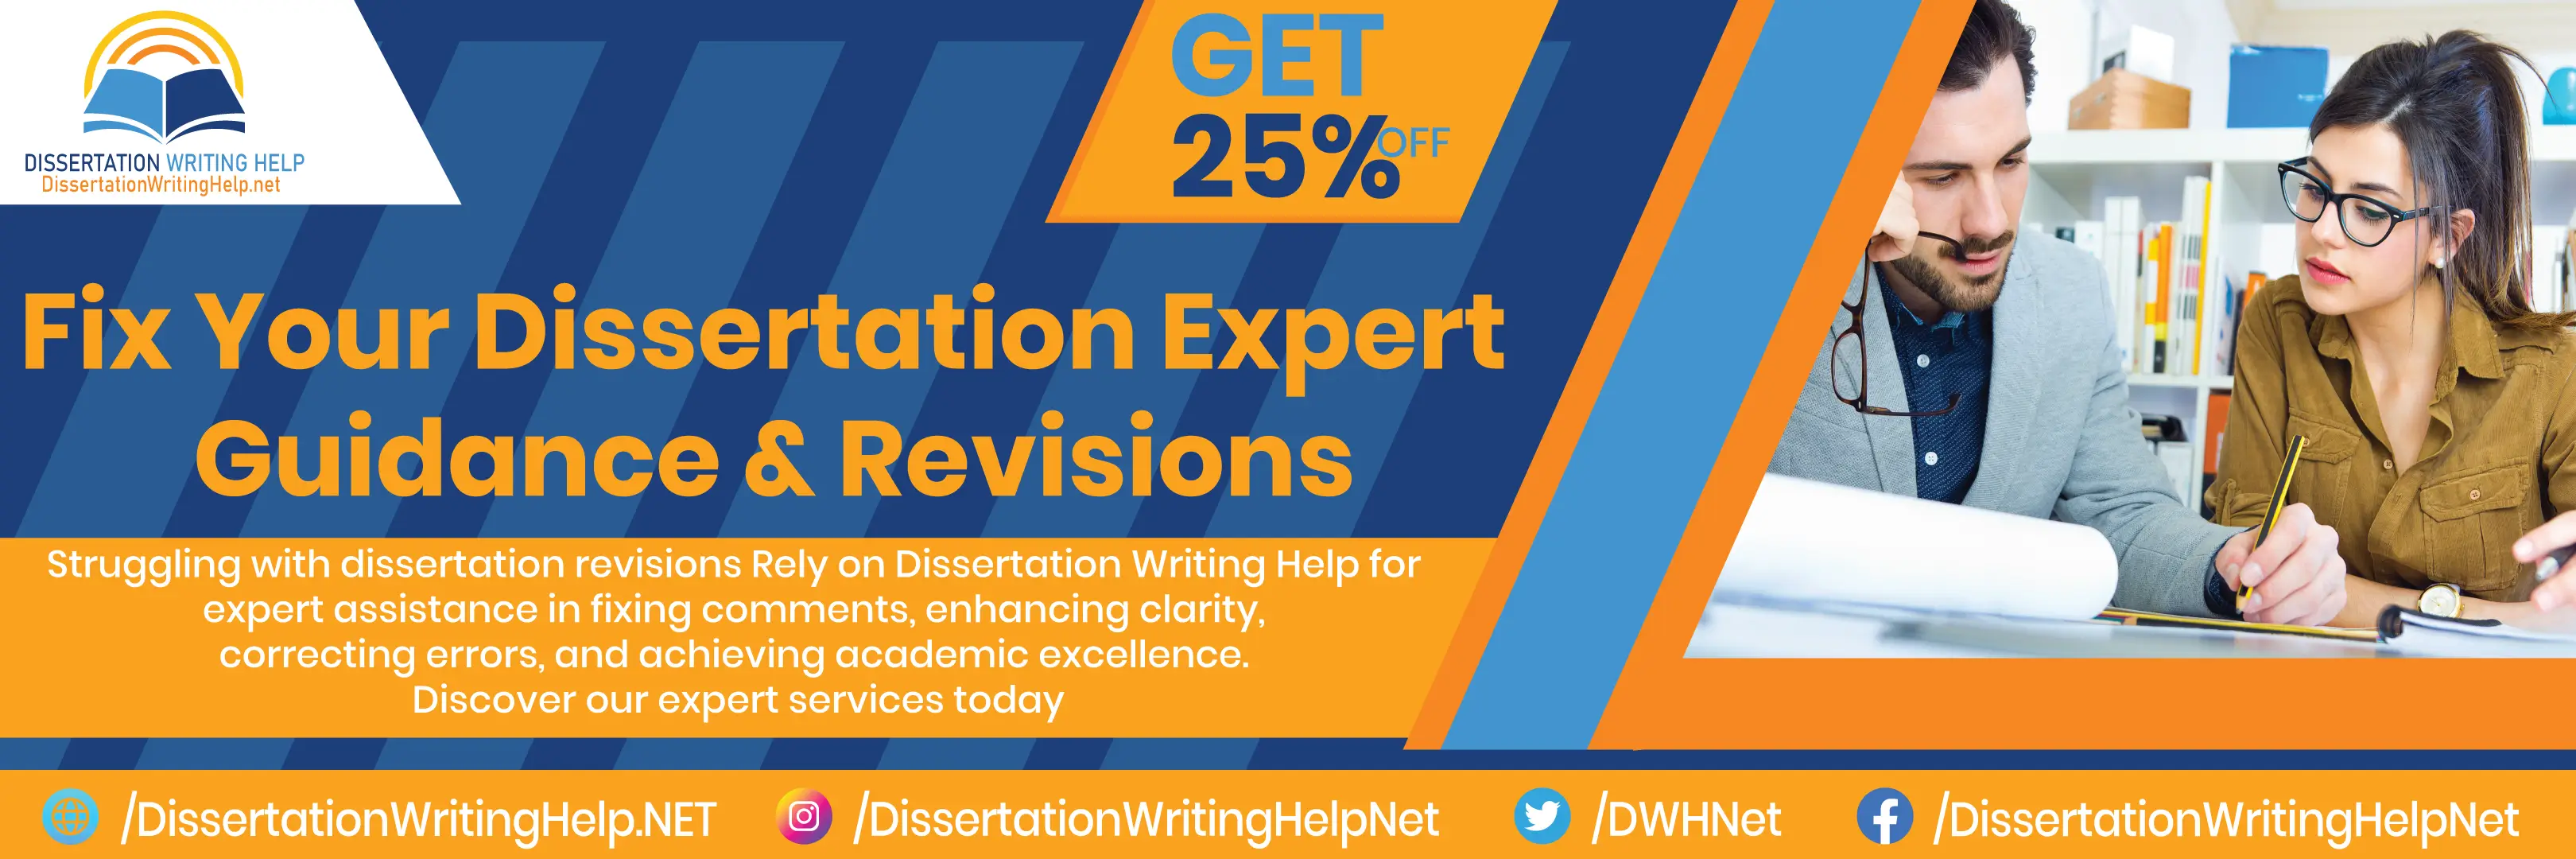 Fix-Your-Dissertation-Expert-Guidance-Revisions